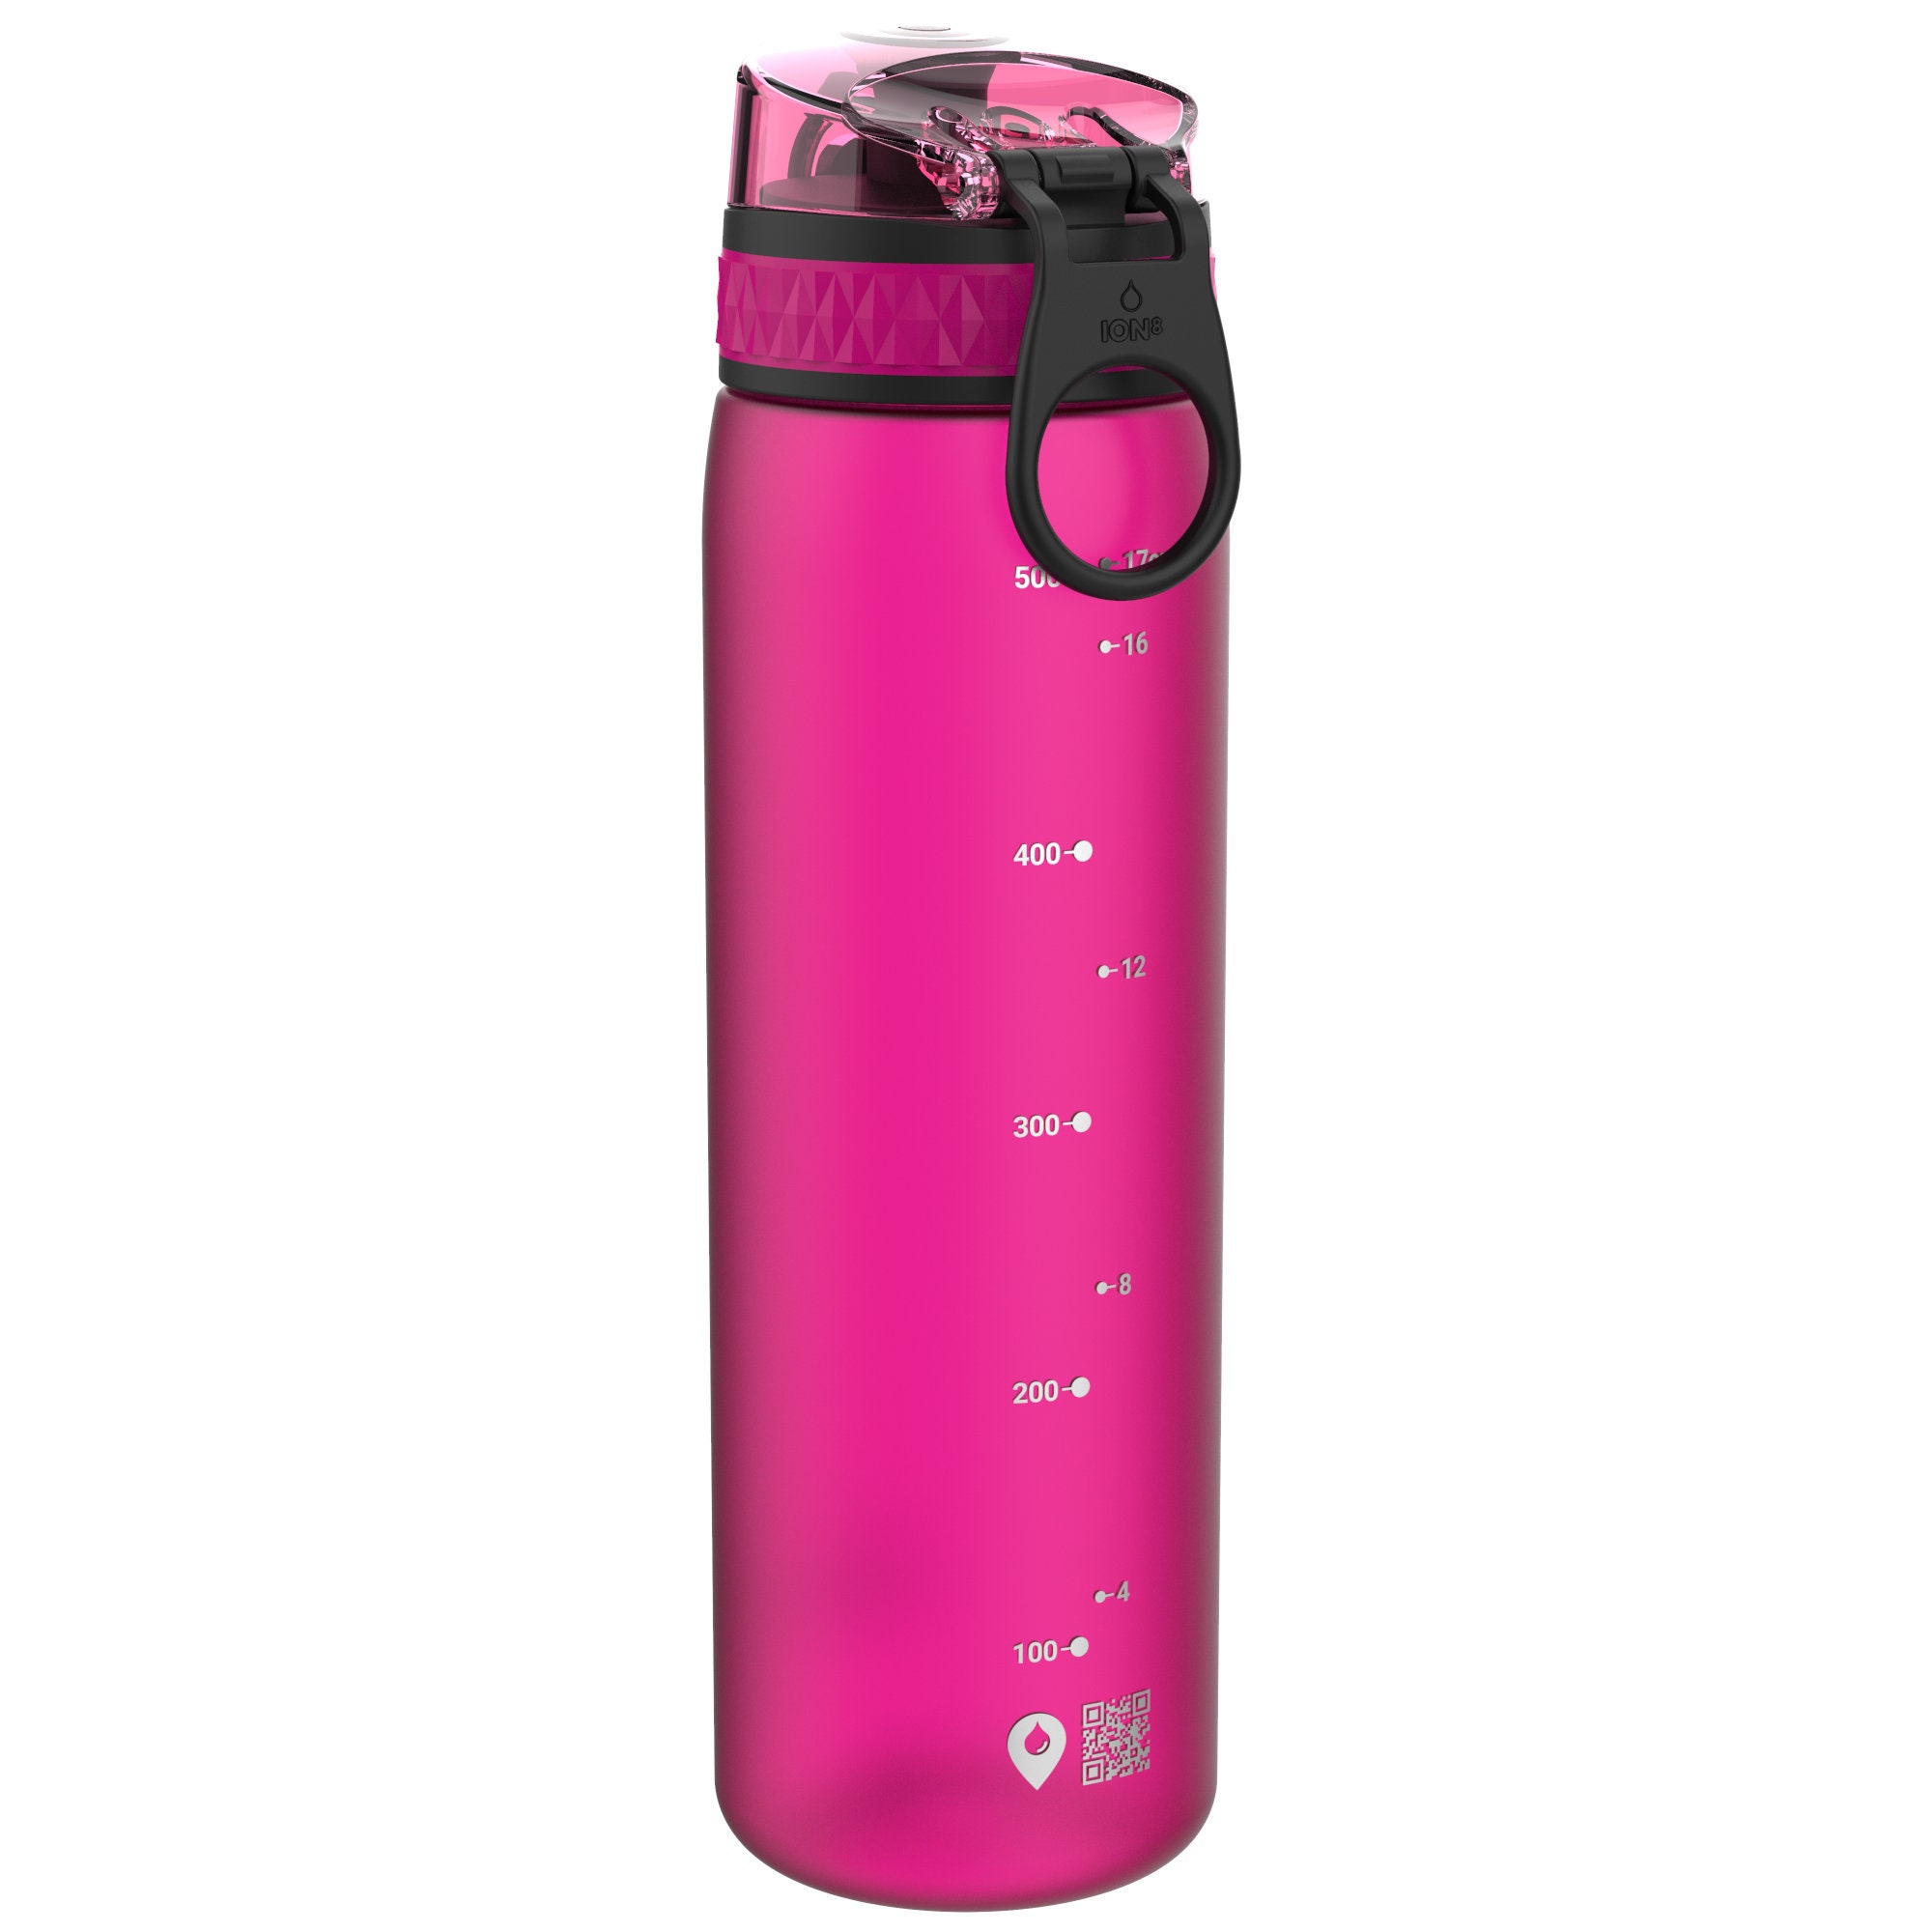 ION8 Leakproof Water Bottle - Able Magazine